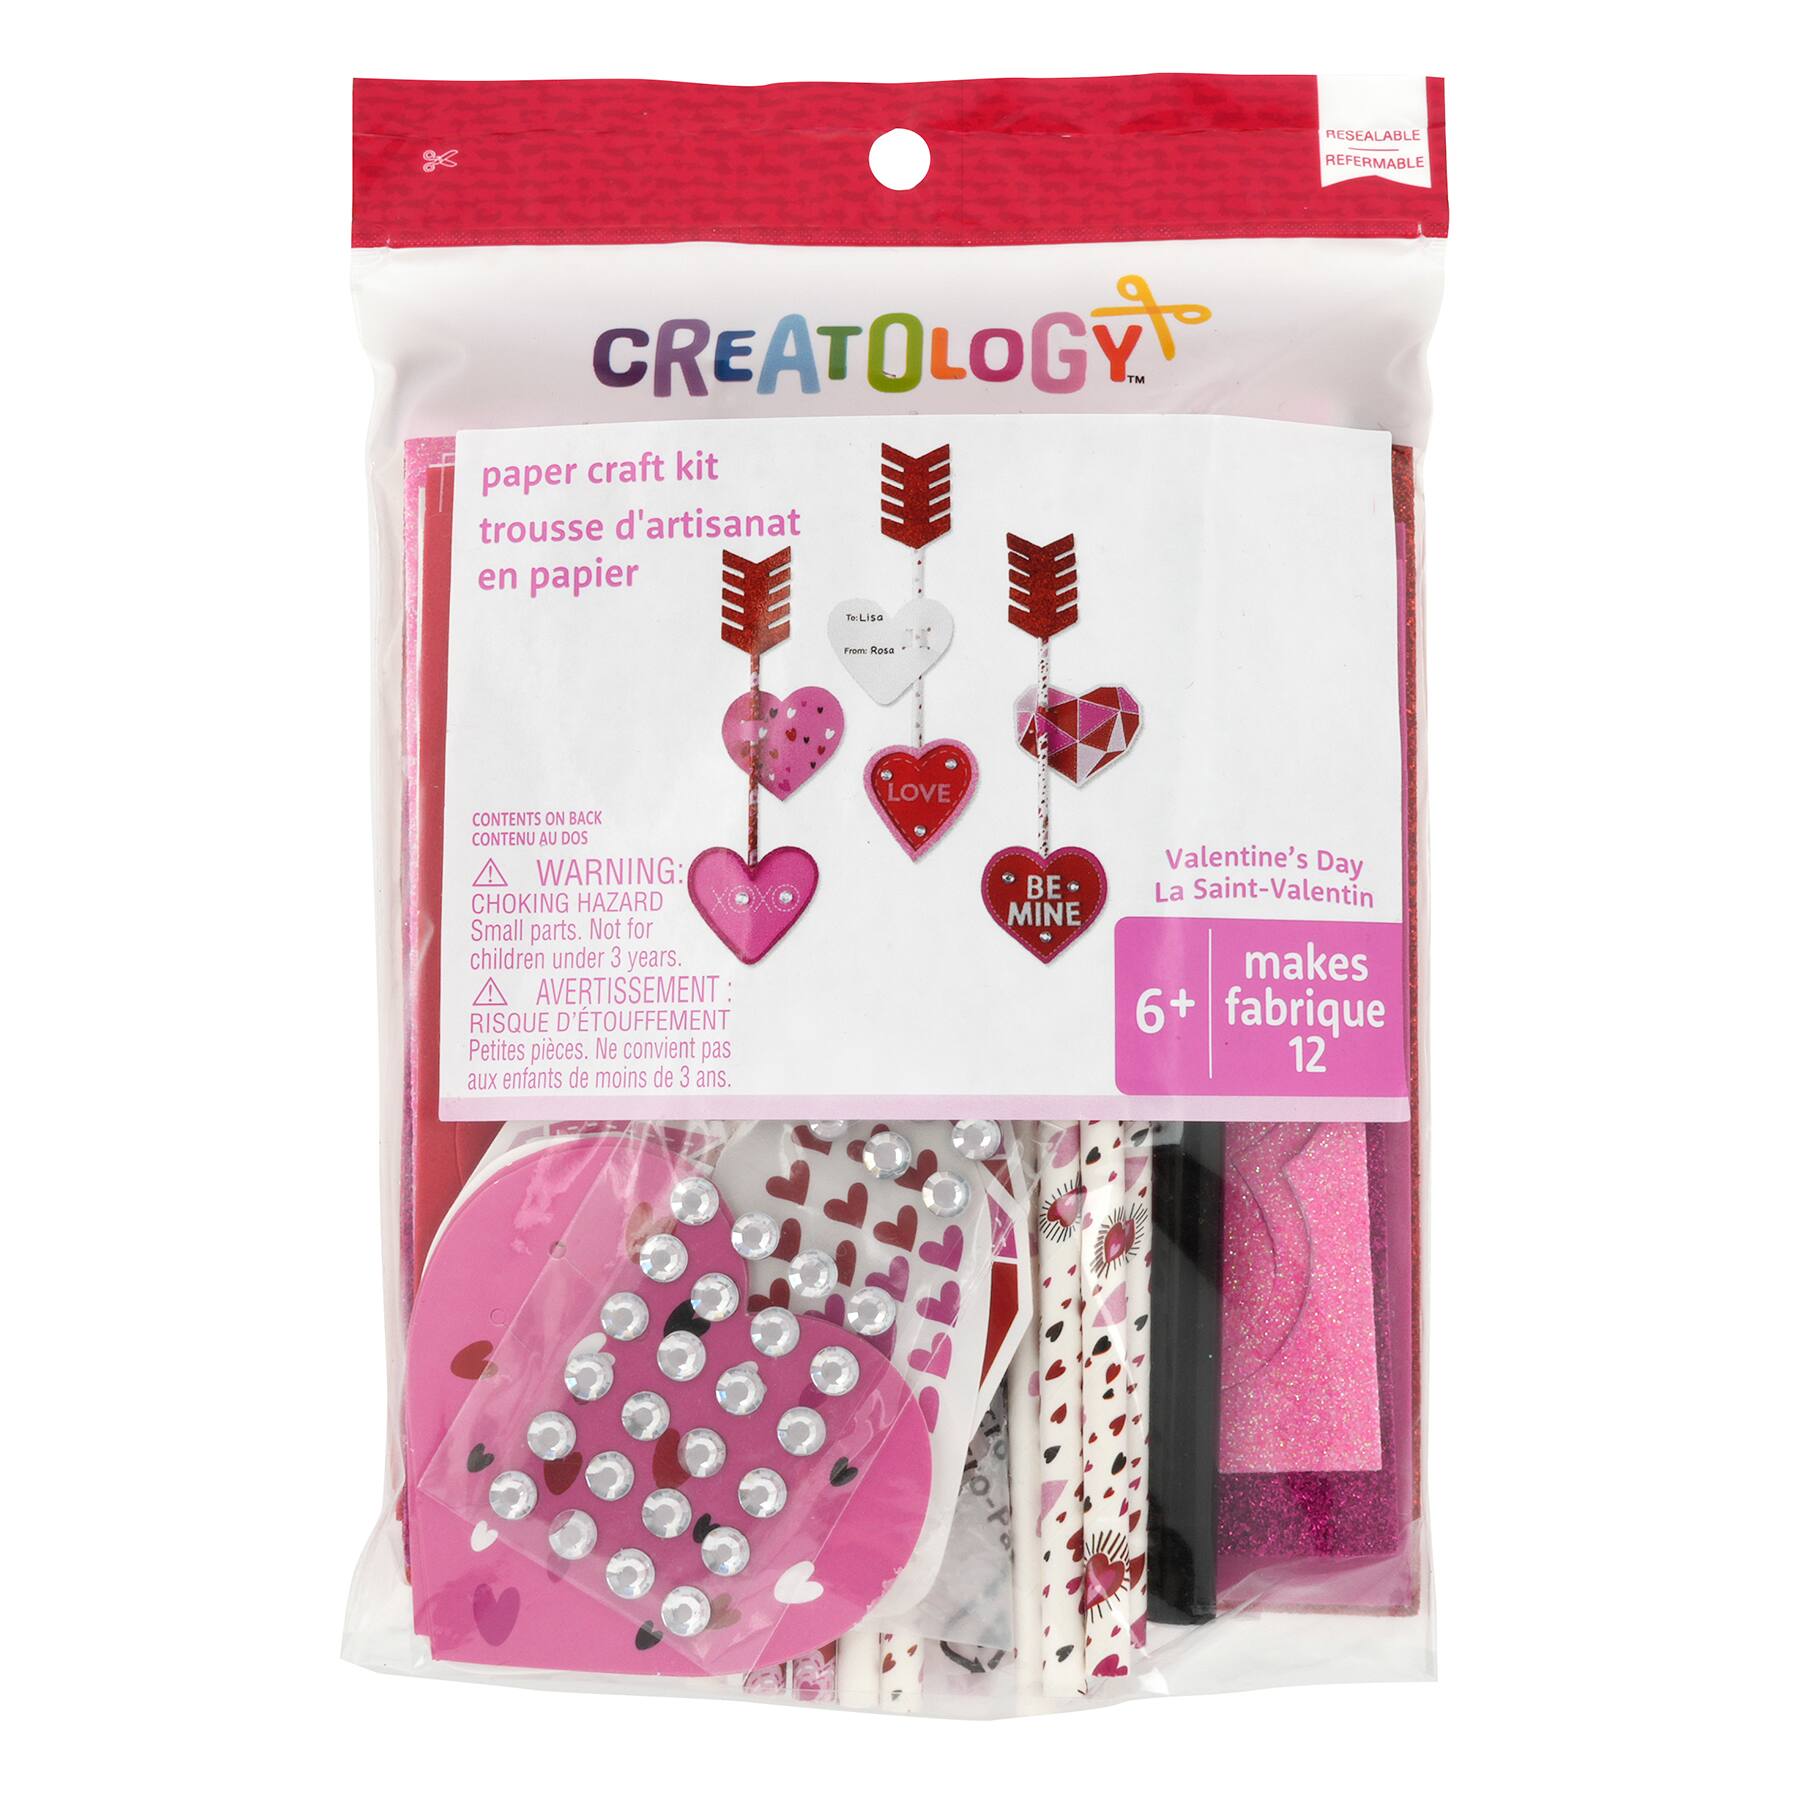 Fruit Shaped Soft Clay Beads by Creatology™